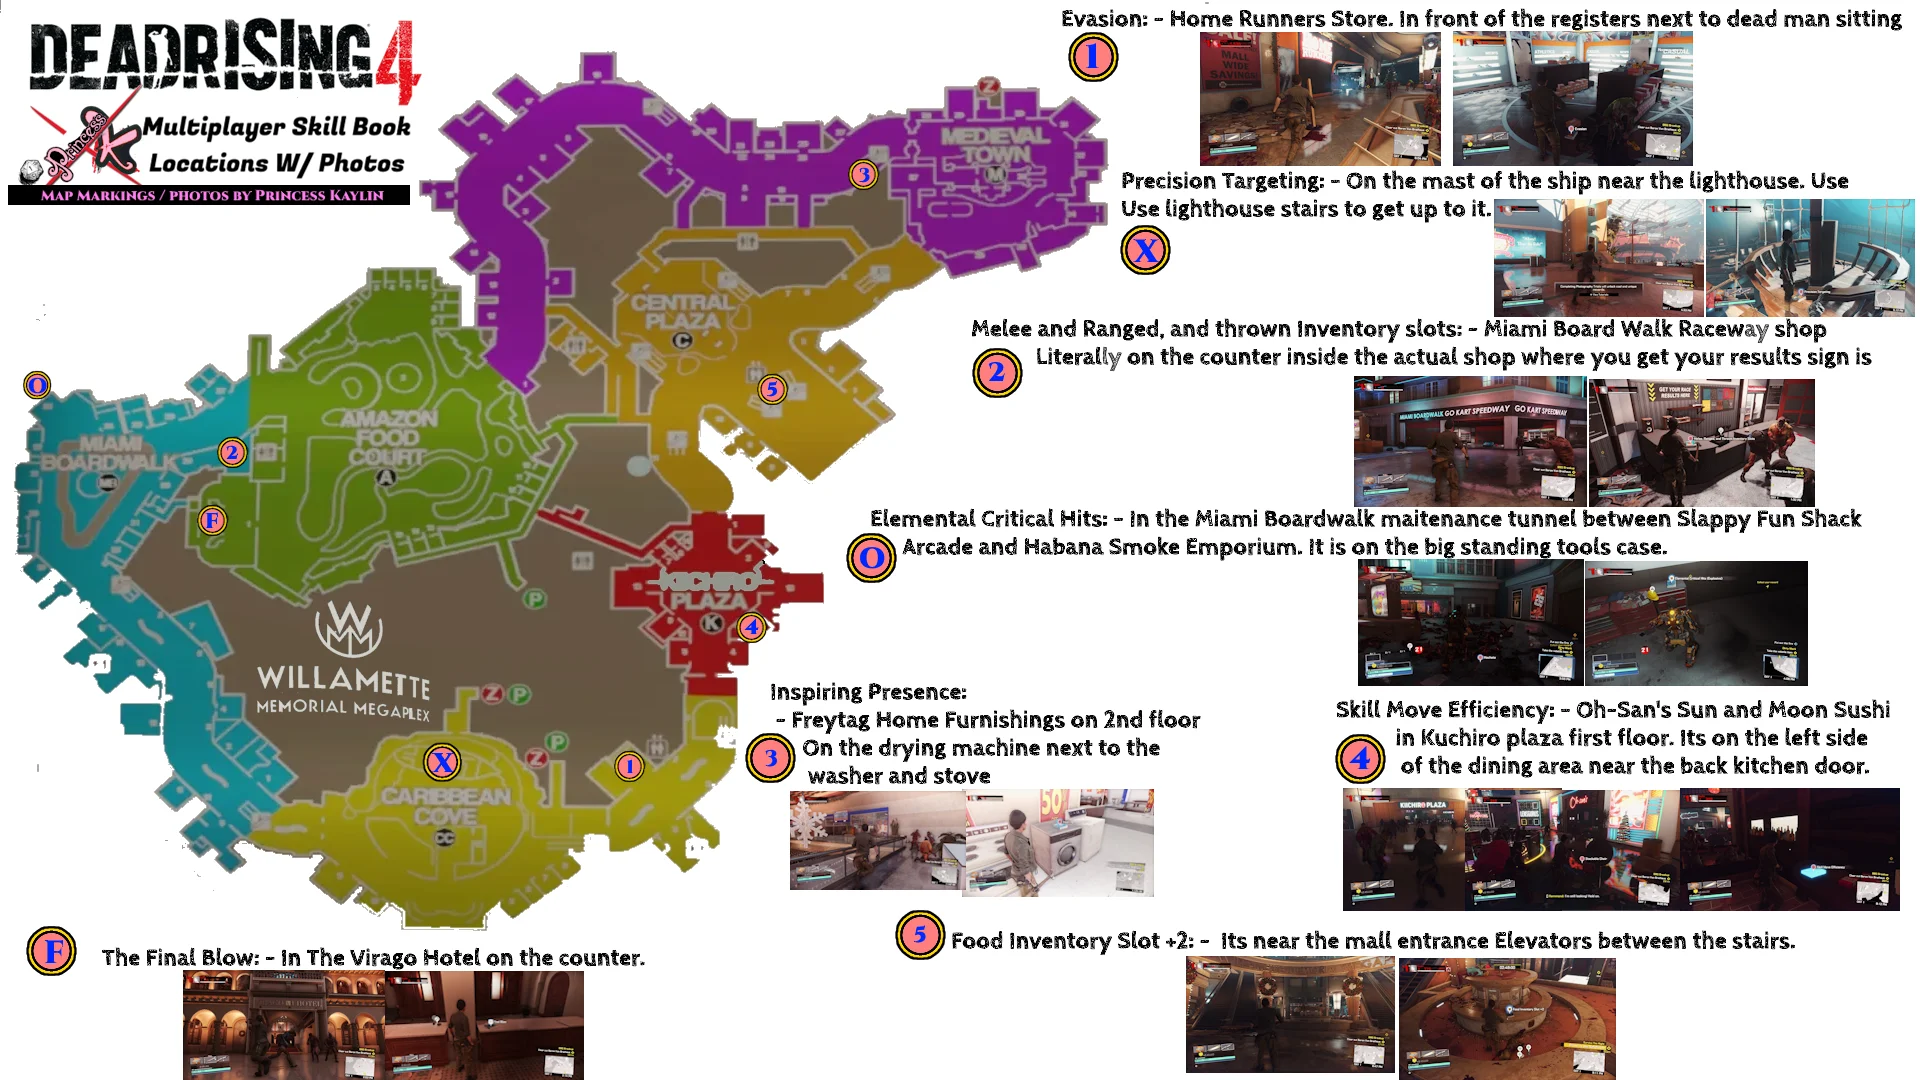 Dead Rising 4: Persons of Interest Locations